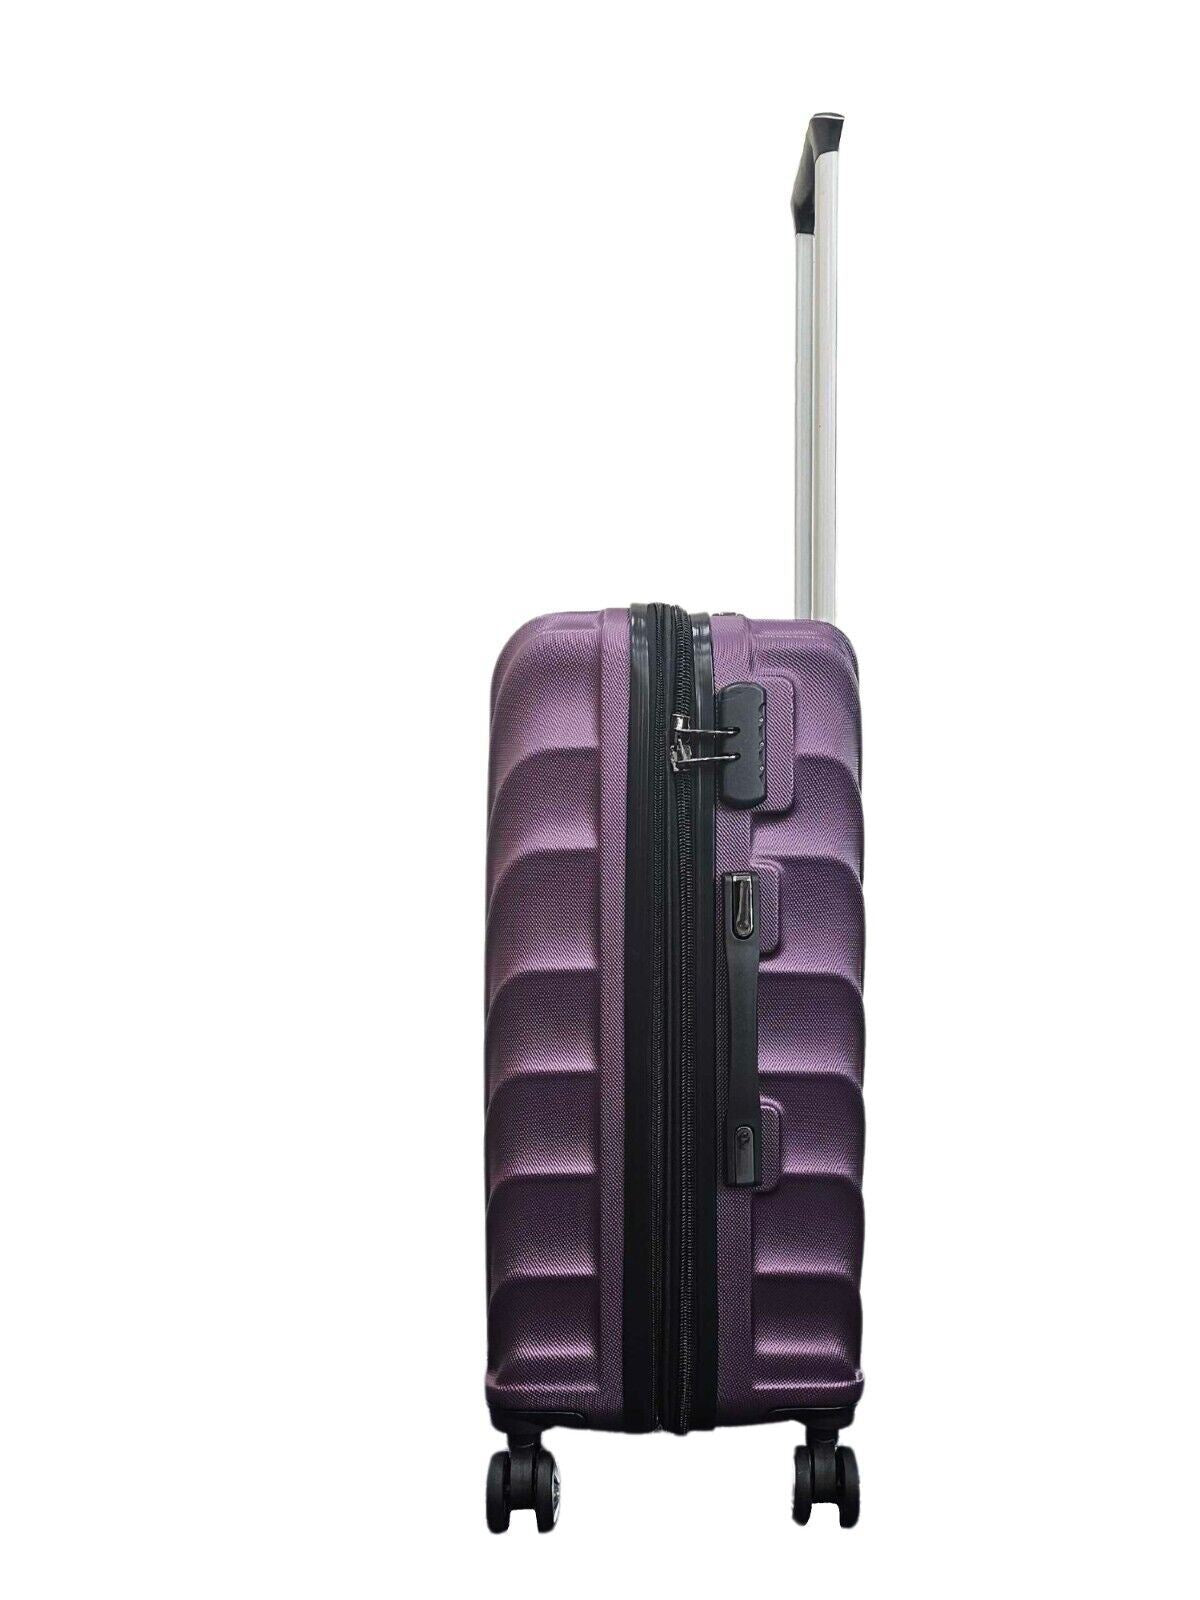 Strong Purple Hard shell Suitcase 4 Wheel ABS Lightweight Cabin Luggage